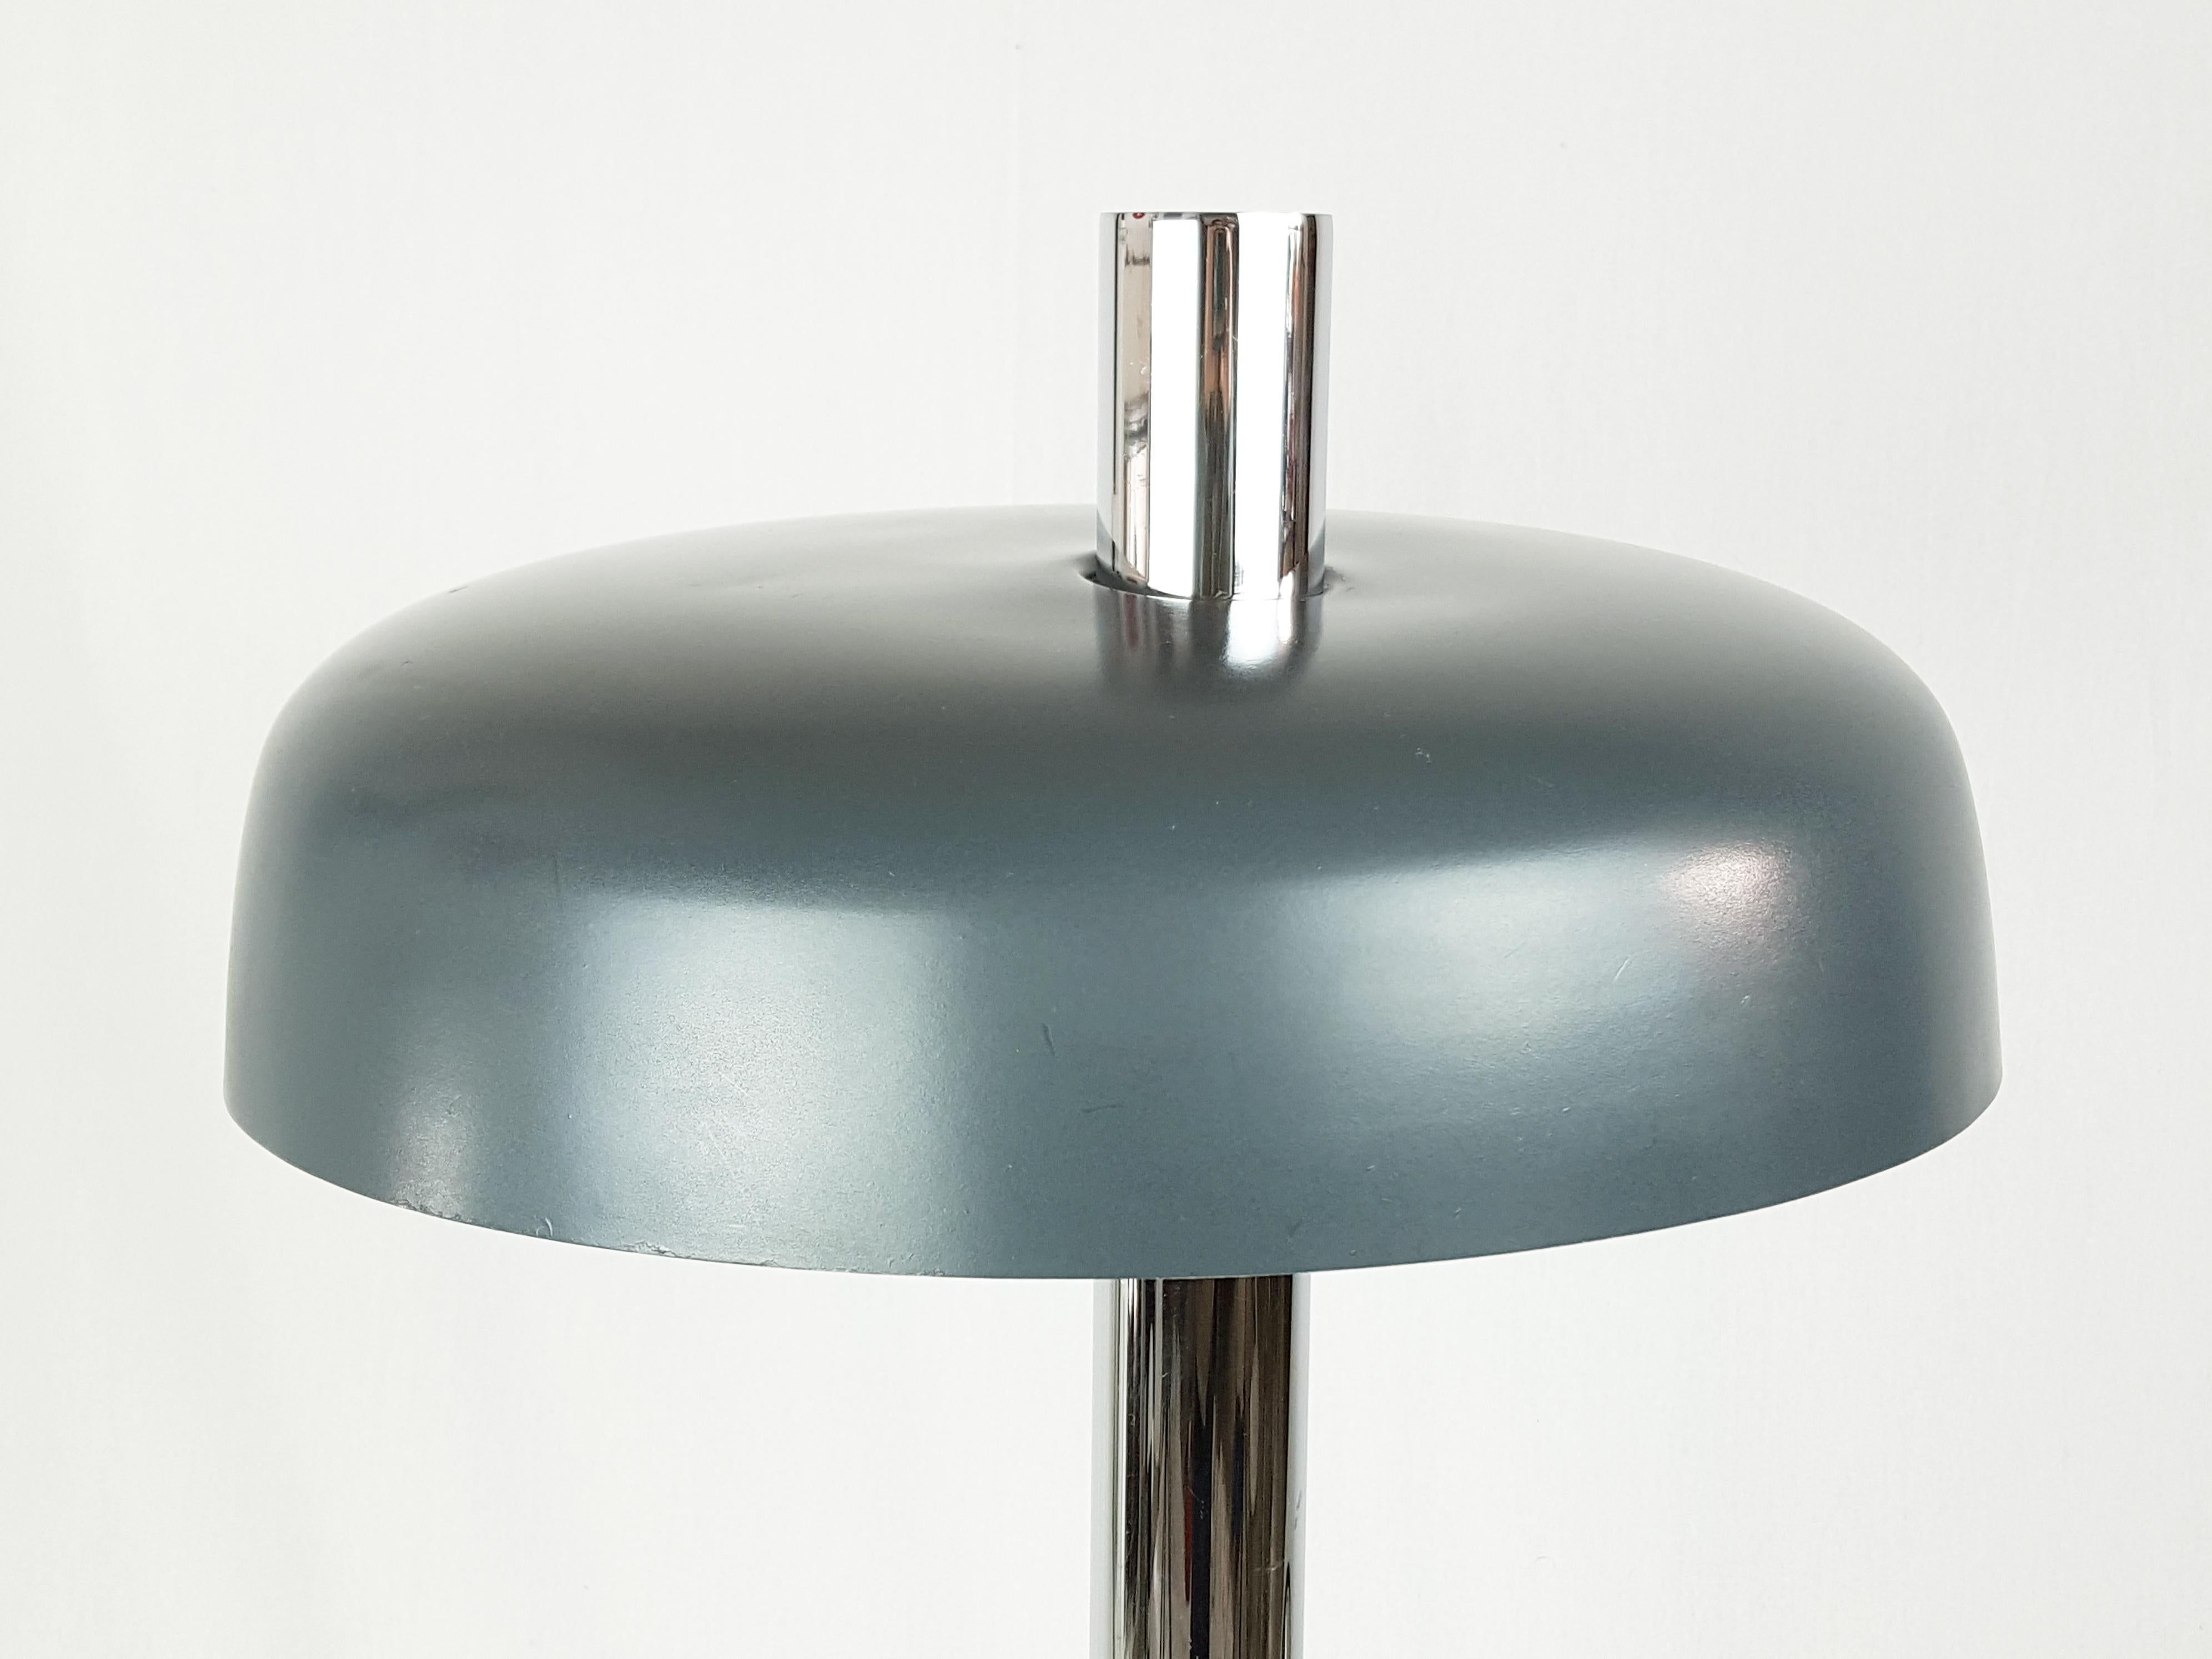 Table or desk lamp produced in Germany by Egon Hillebrand for Hillebrand Lighting, since 1967. Dark gray / cobalt blue painted aluminium lamp shade, chrome-plated metal structure with built-in switch. 2 E27 lamp sockets. Very good condition. Some